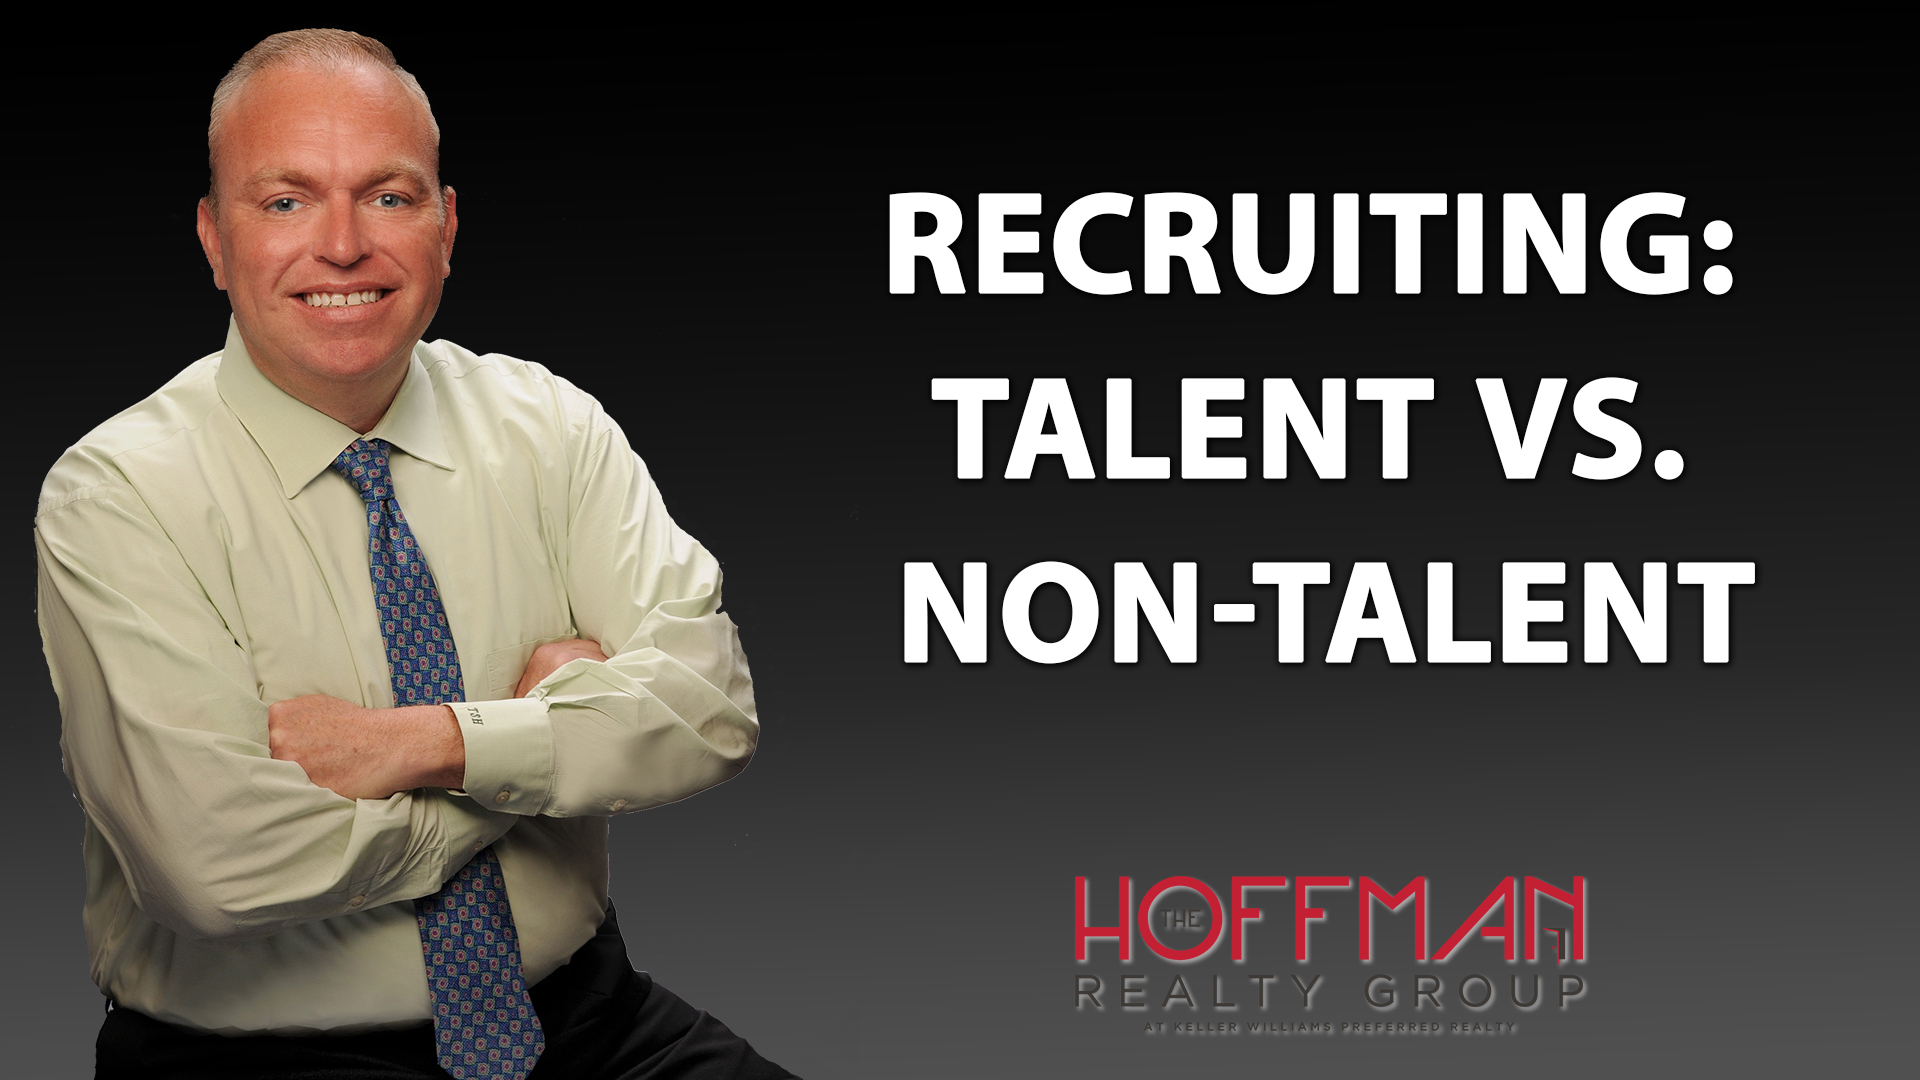 Know the Difference Between Hiring Talent & Non-Talent